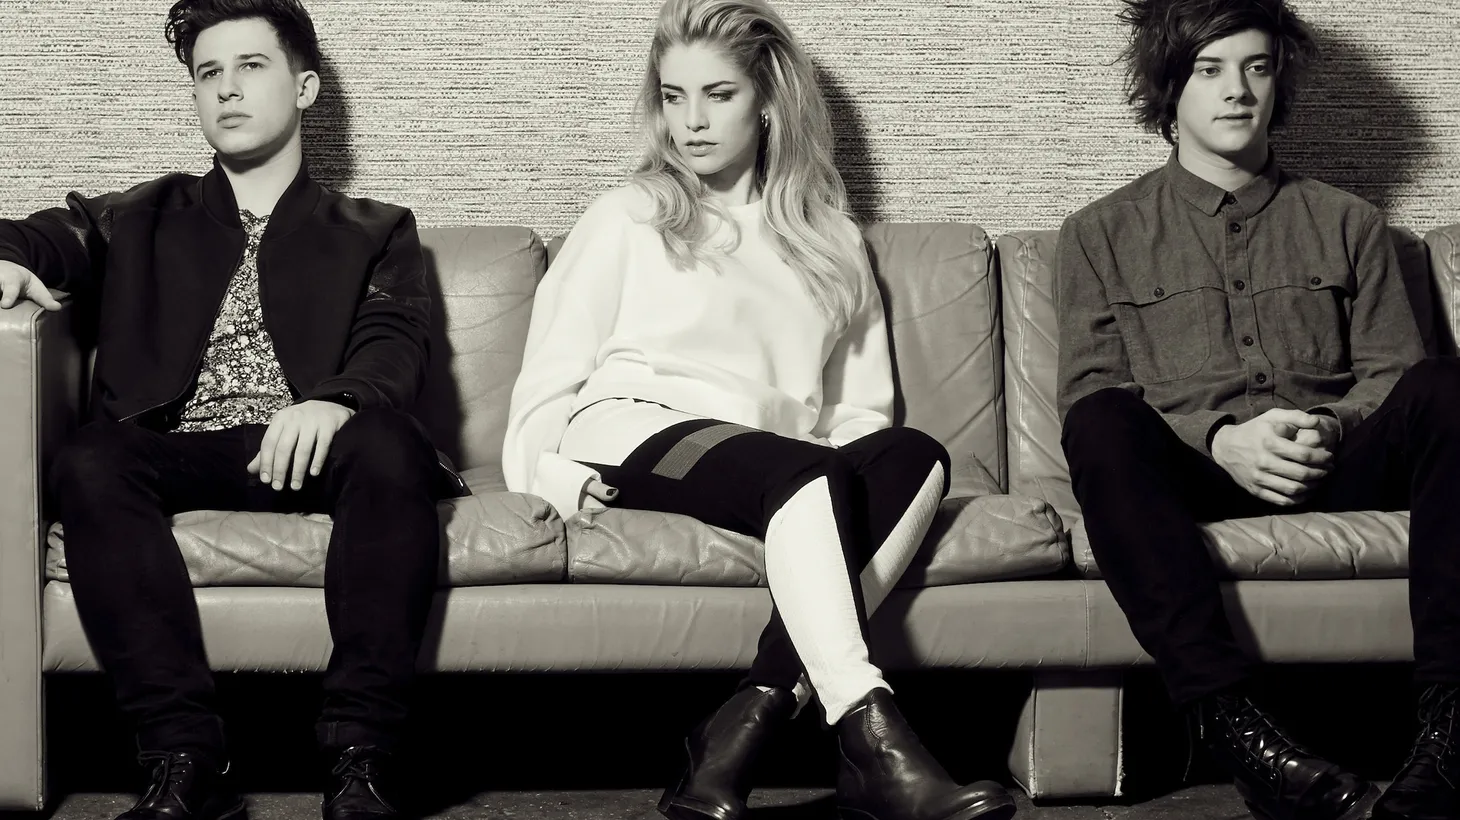 There is a lot of buzz around London Grammar, a British trip-hop trio fronted by Hannah Reid.